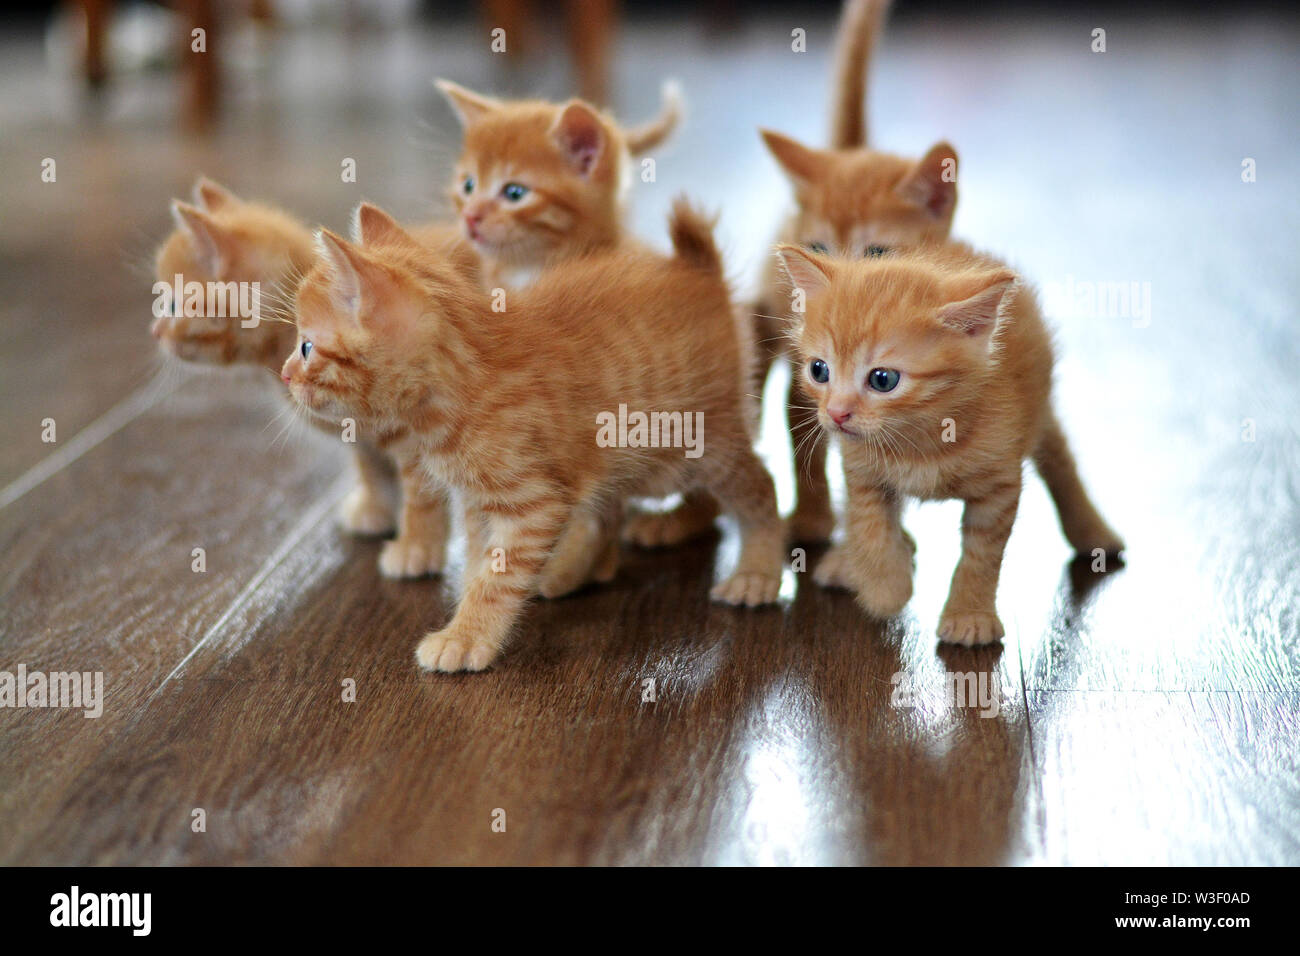 The little red kitten plays on the floor looking directly at us. Horizontal photo, beige and orange color Stock Photo